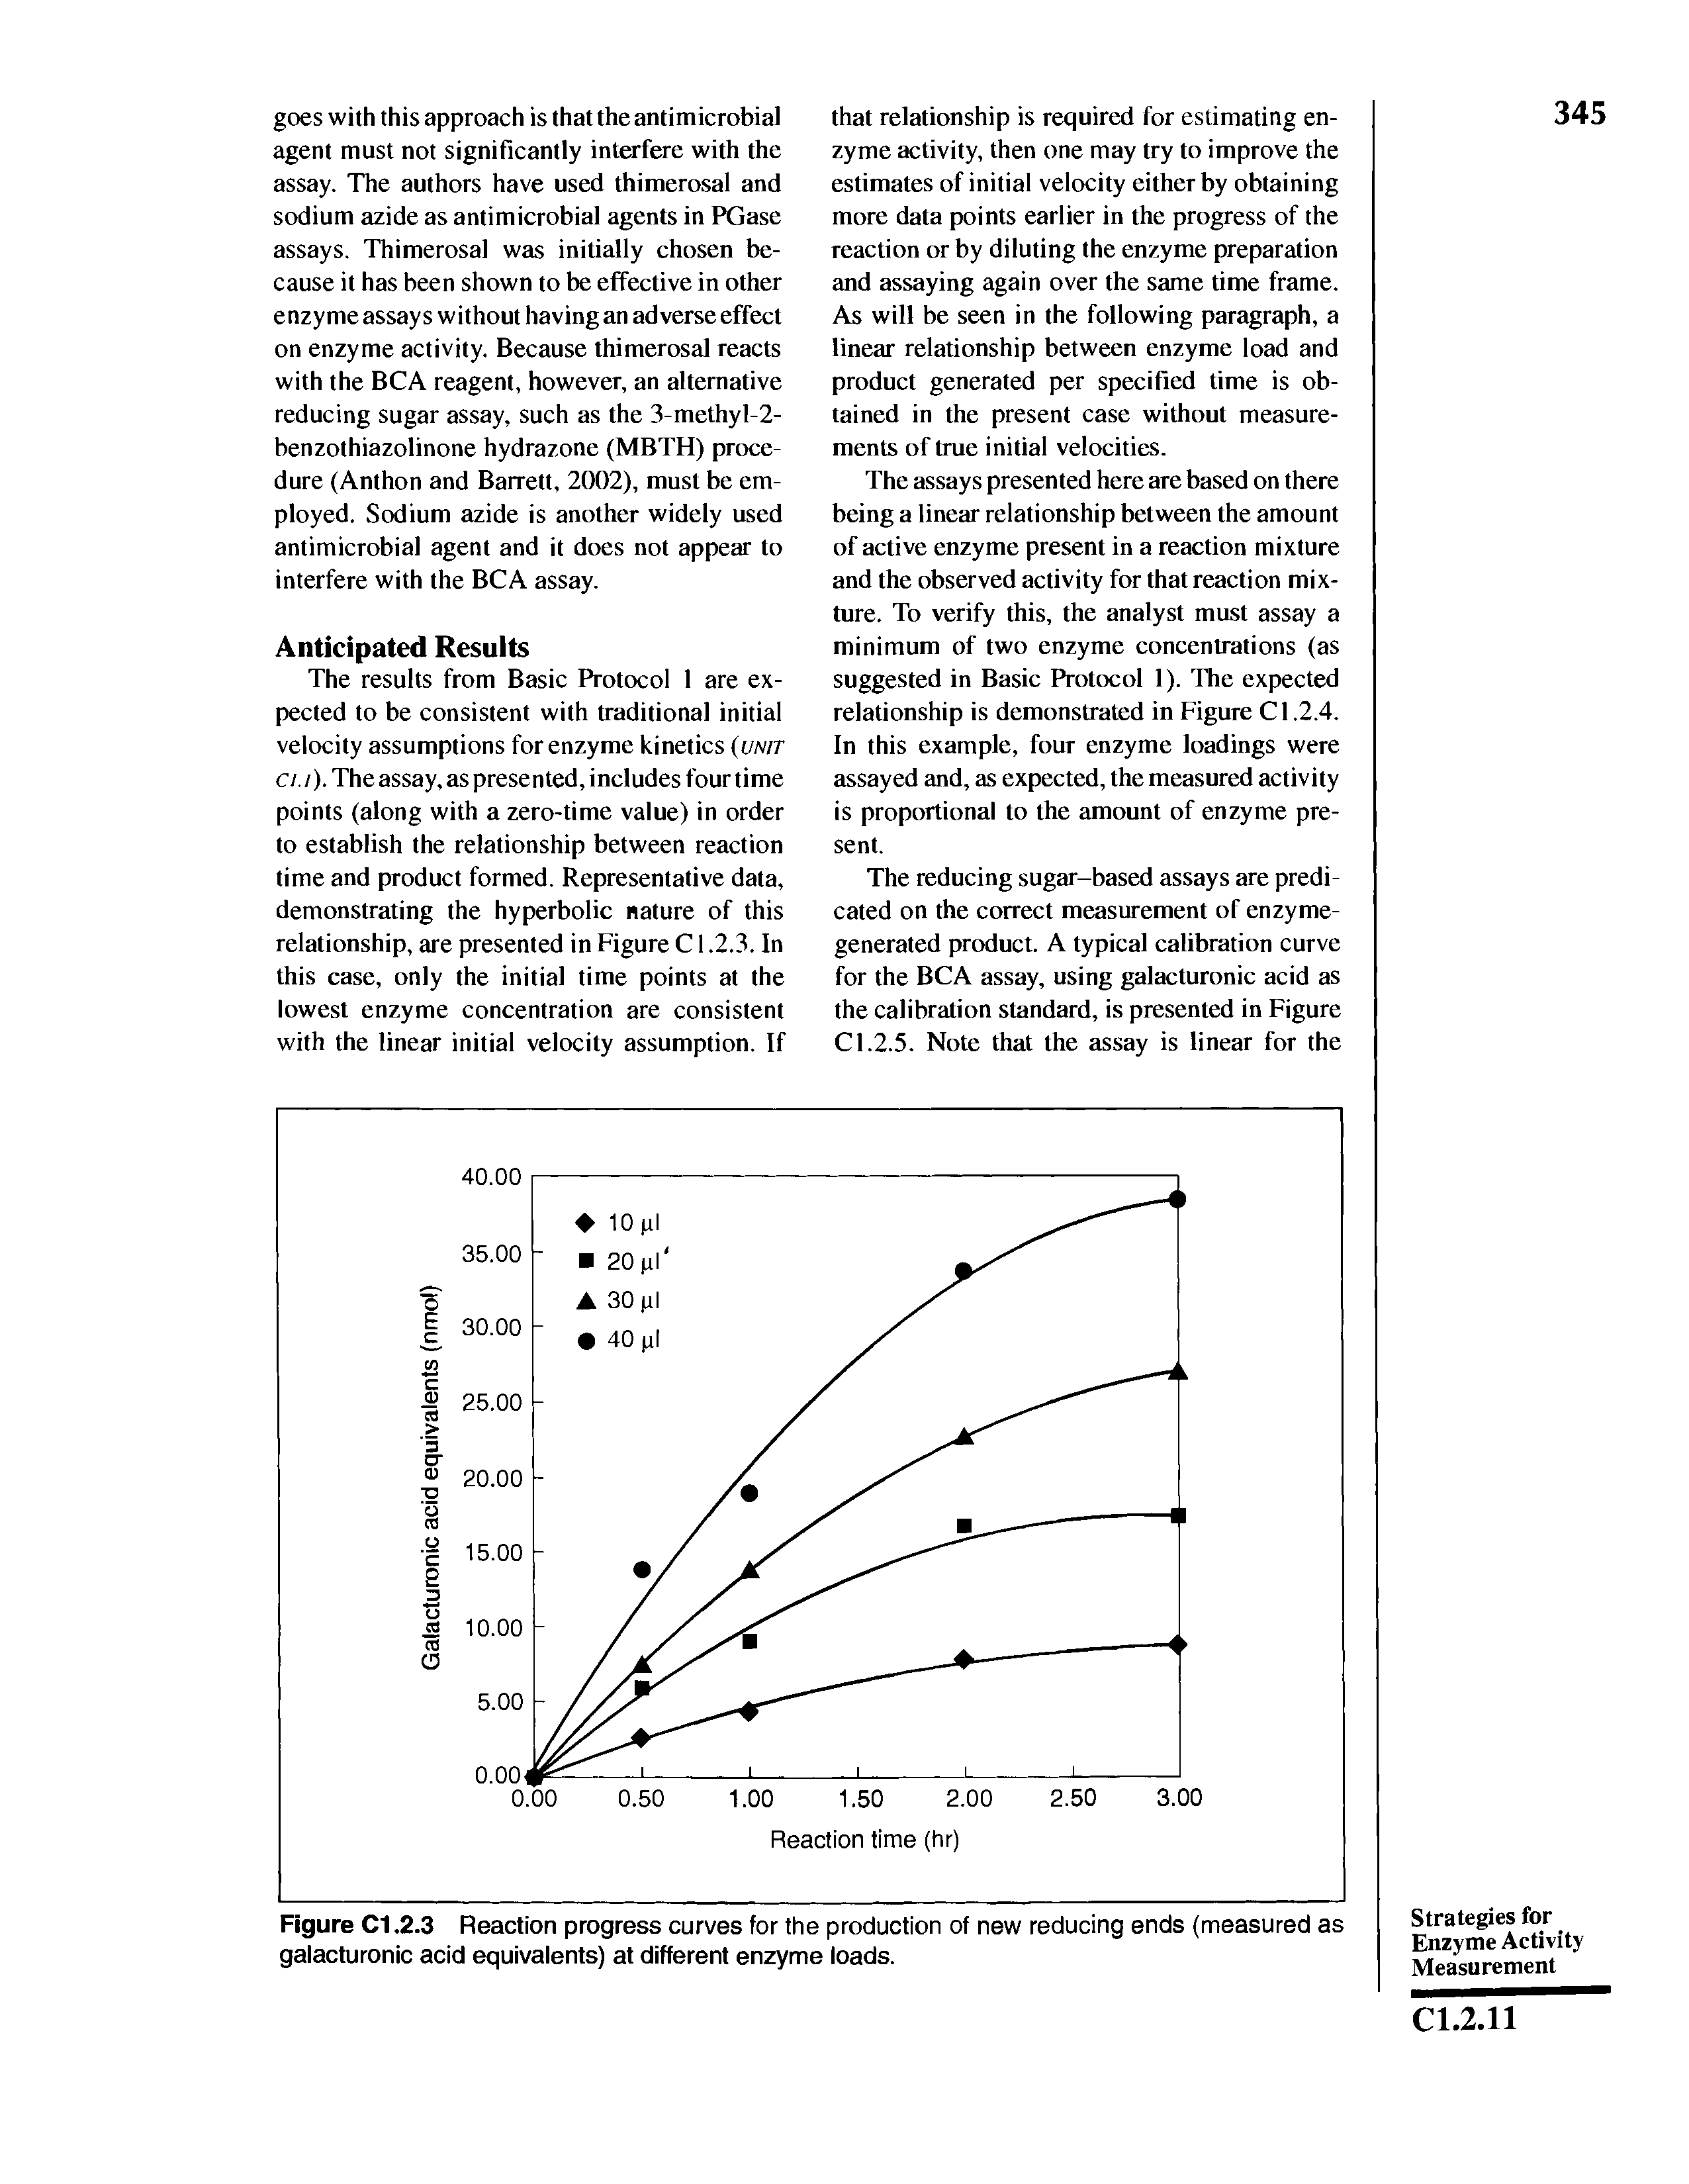 Figure C1.2.3 Reaction progress curves for the production of new reducing ends (measured as galacturonic acid equivalents) at different enzyme loads.